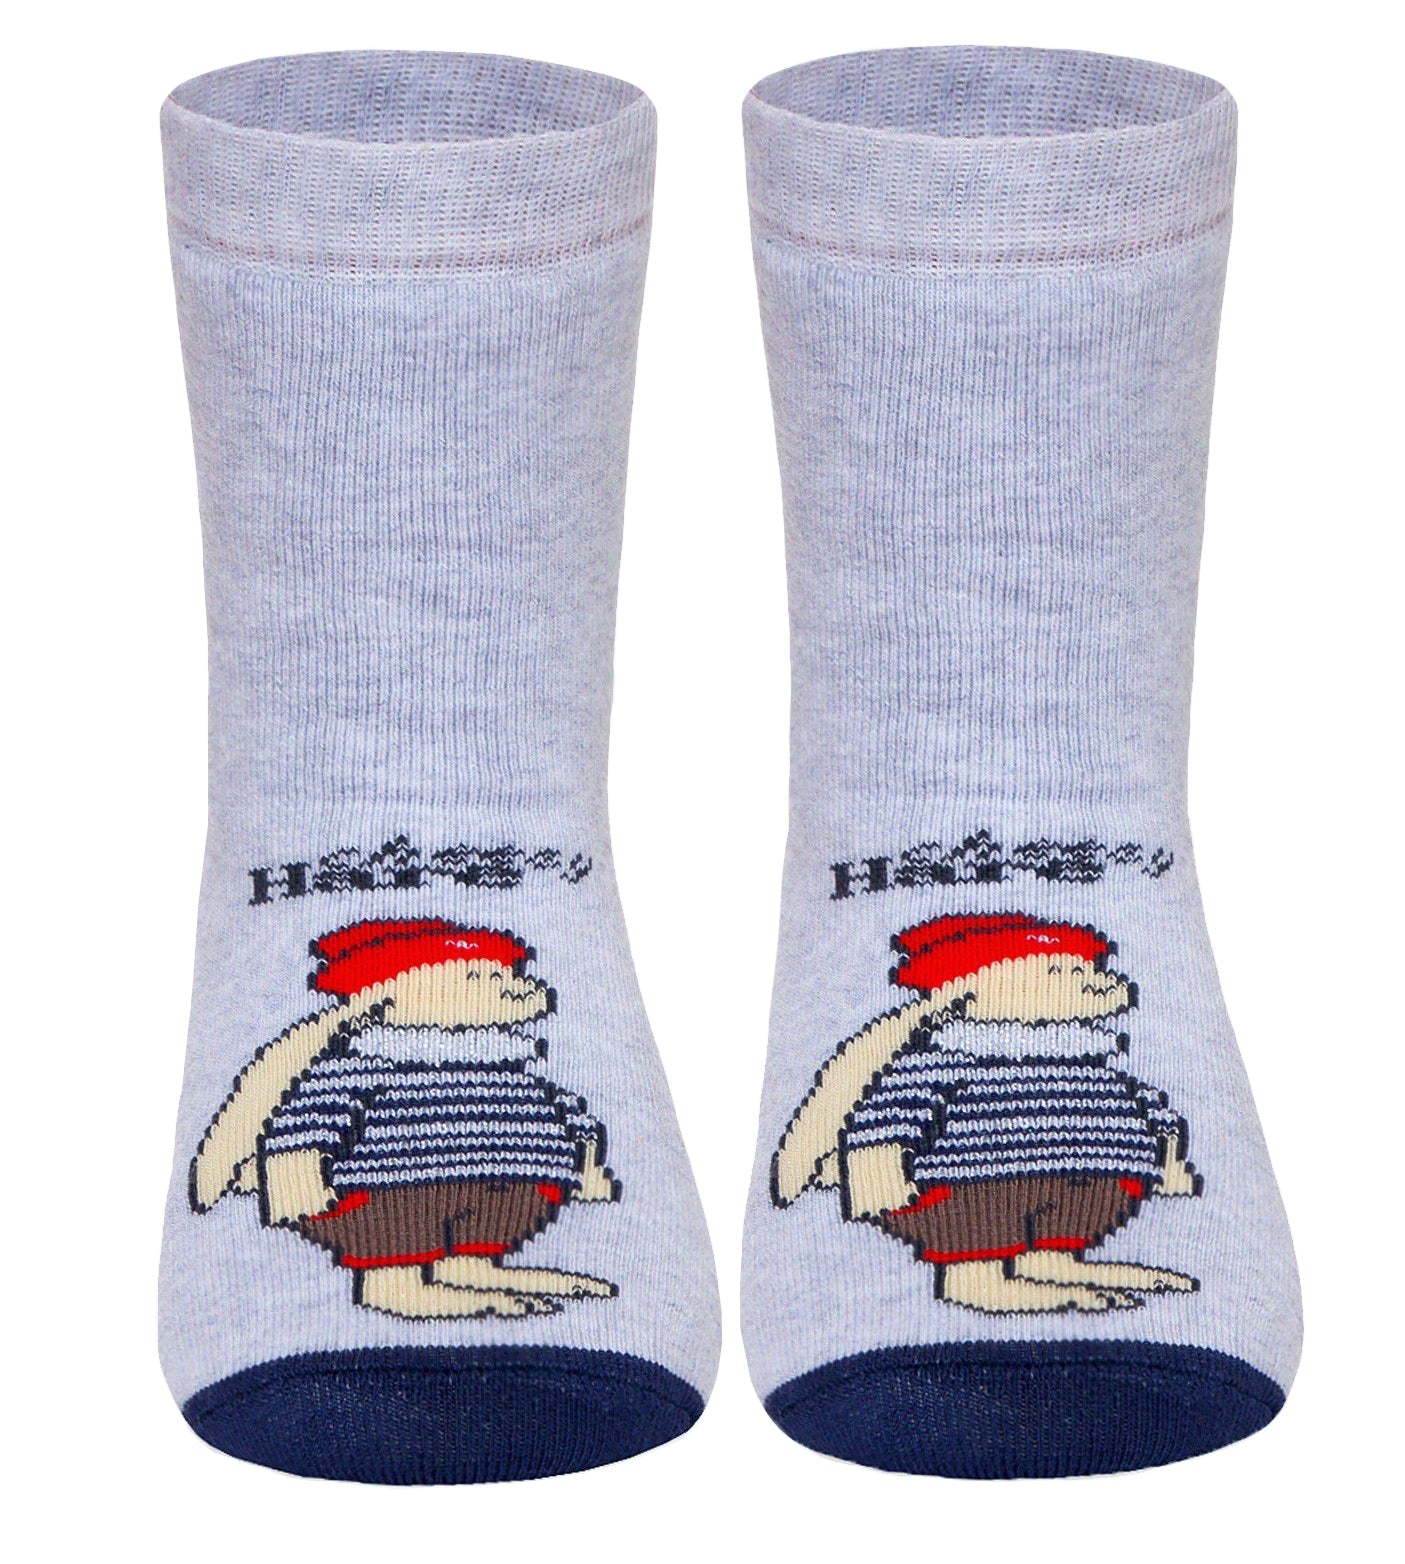 Conte-Kids Pretty Tootsies #17С-45СП(294) - Lot of 2 pairs Cotton Terry Socks For Boys & Girls